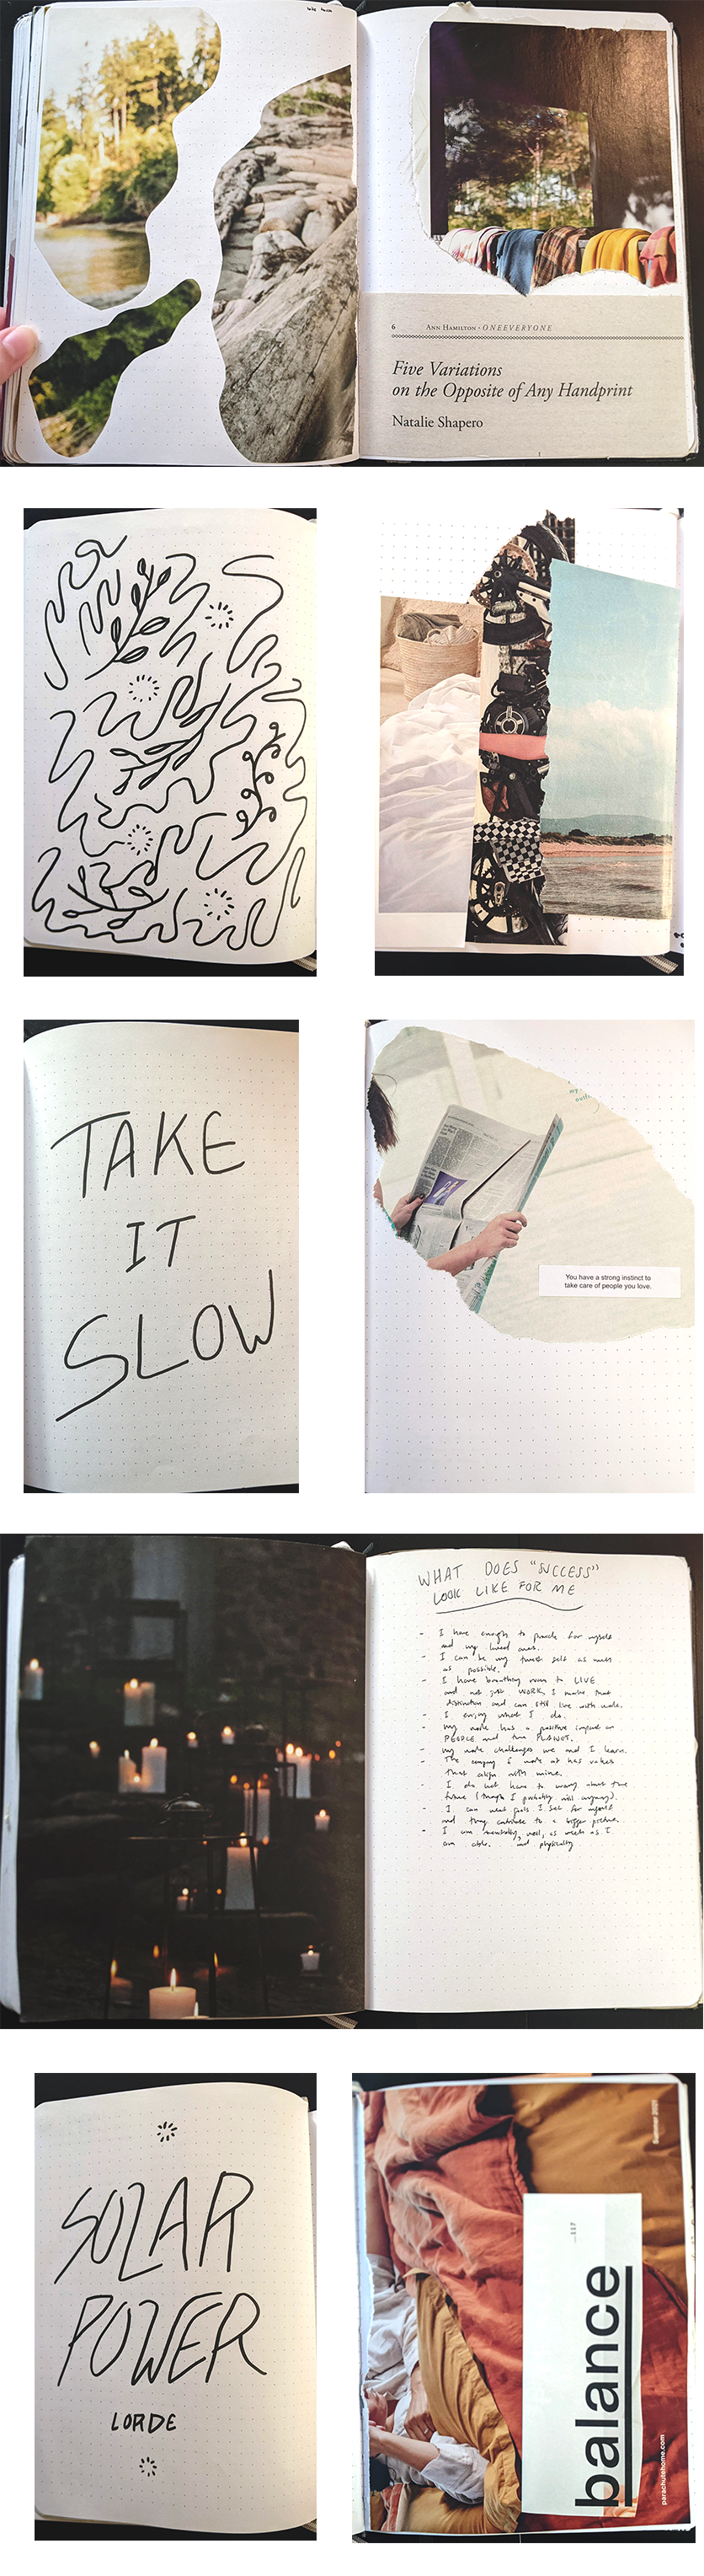 journal pages, including collages of nature photos, drawings of plants, and the words "take it slow" and "solar power"